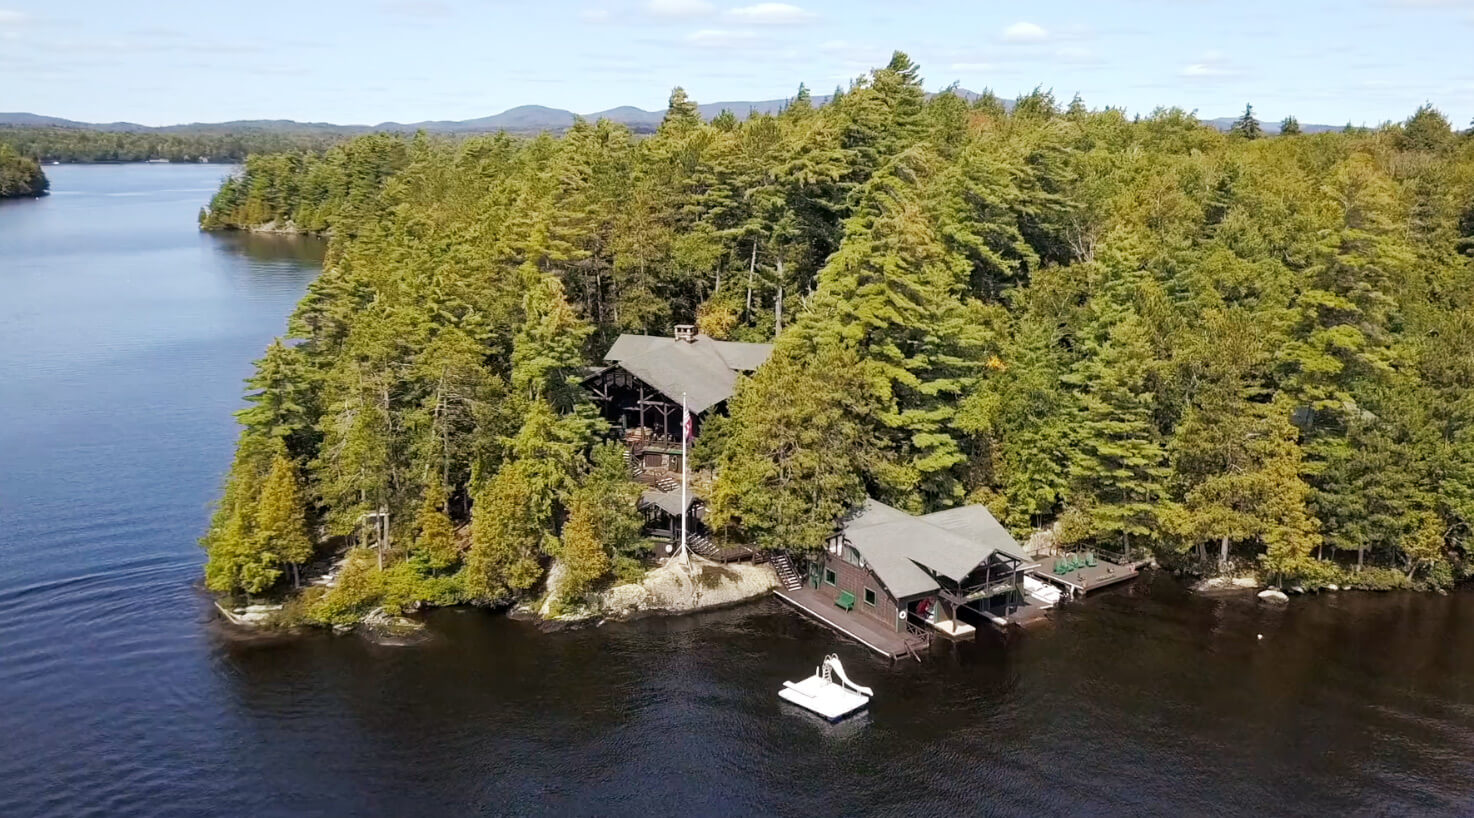 An aerial view of a beautiful estate nestled between trees and the shoreline of an Adirondack lake